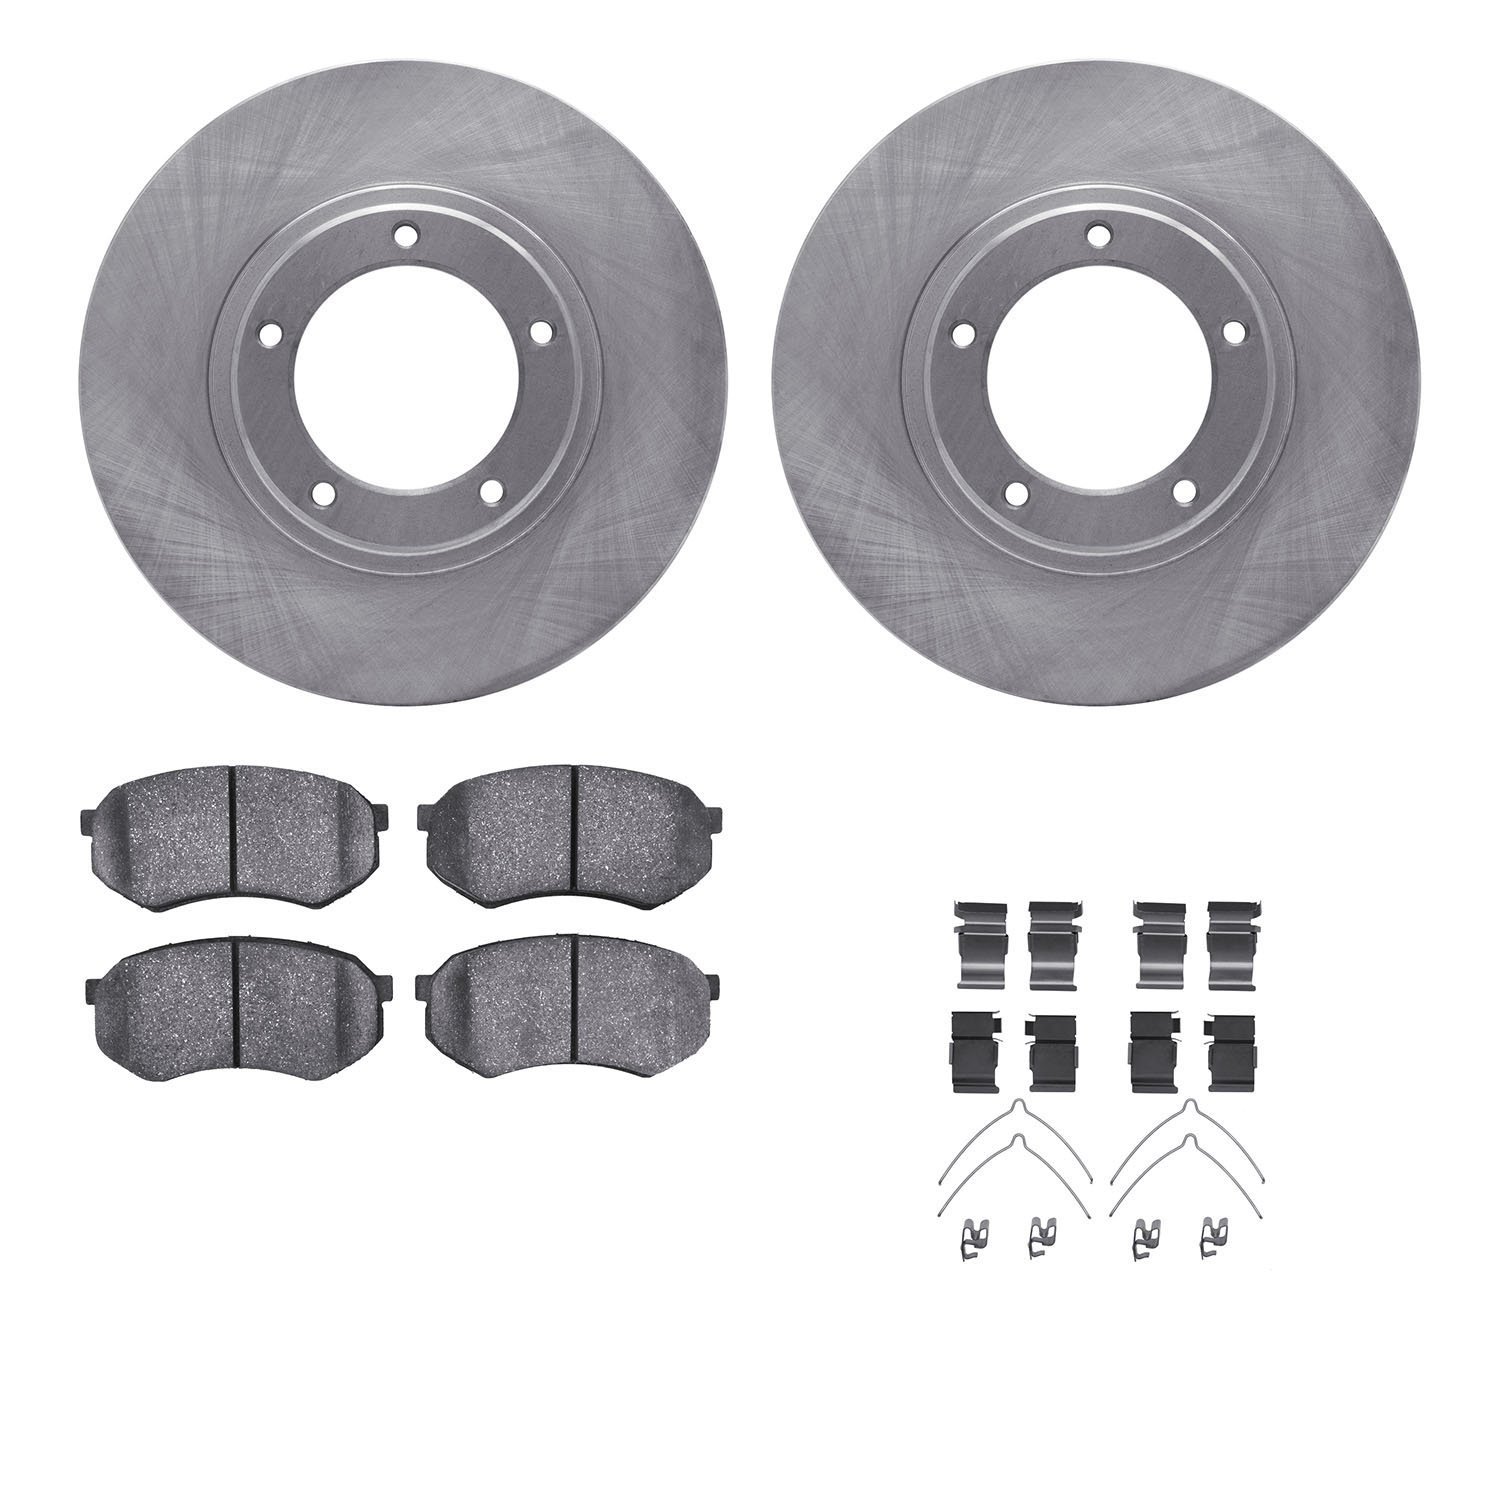 6412-76028 Brake Rotors with Ultimate-Duty Brake Pads Kit & Hardware, 1995-2004 Lexus/Toyota/Scion, Position: Front